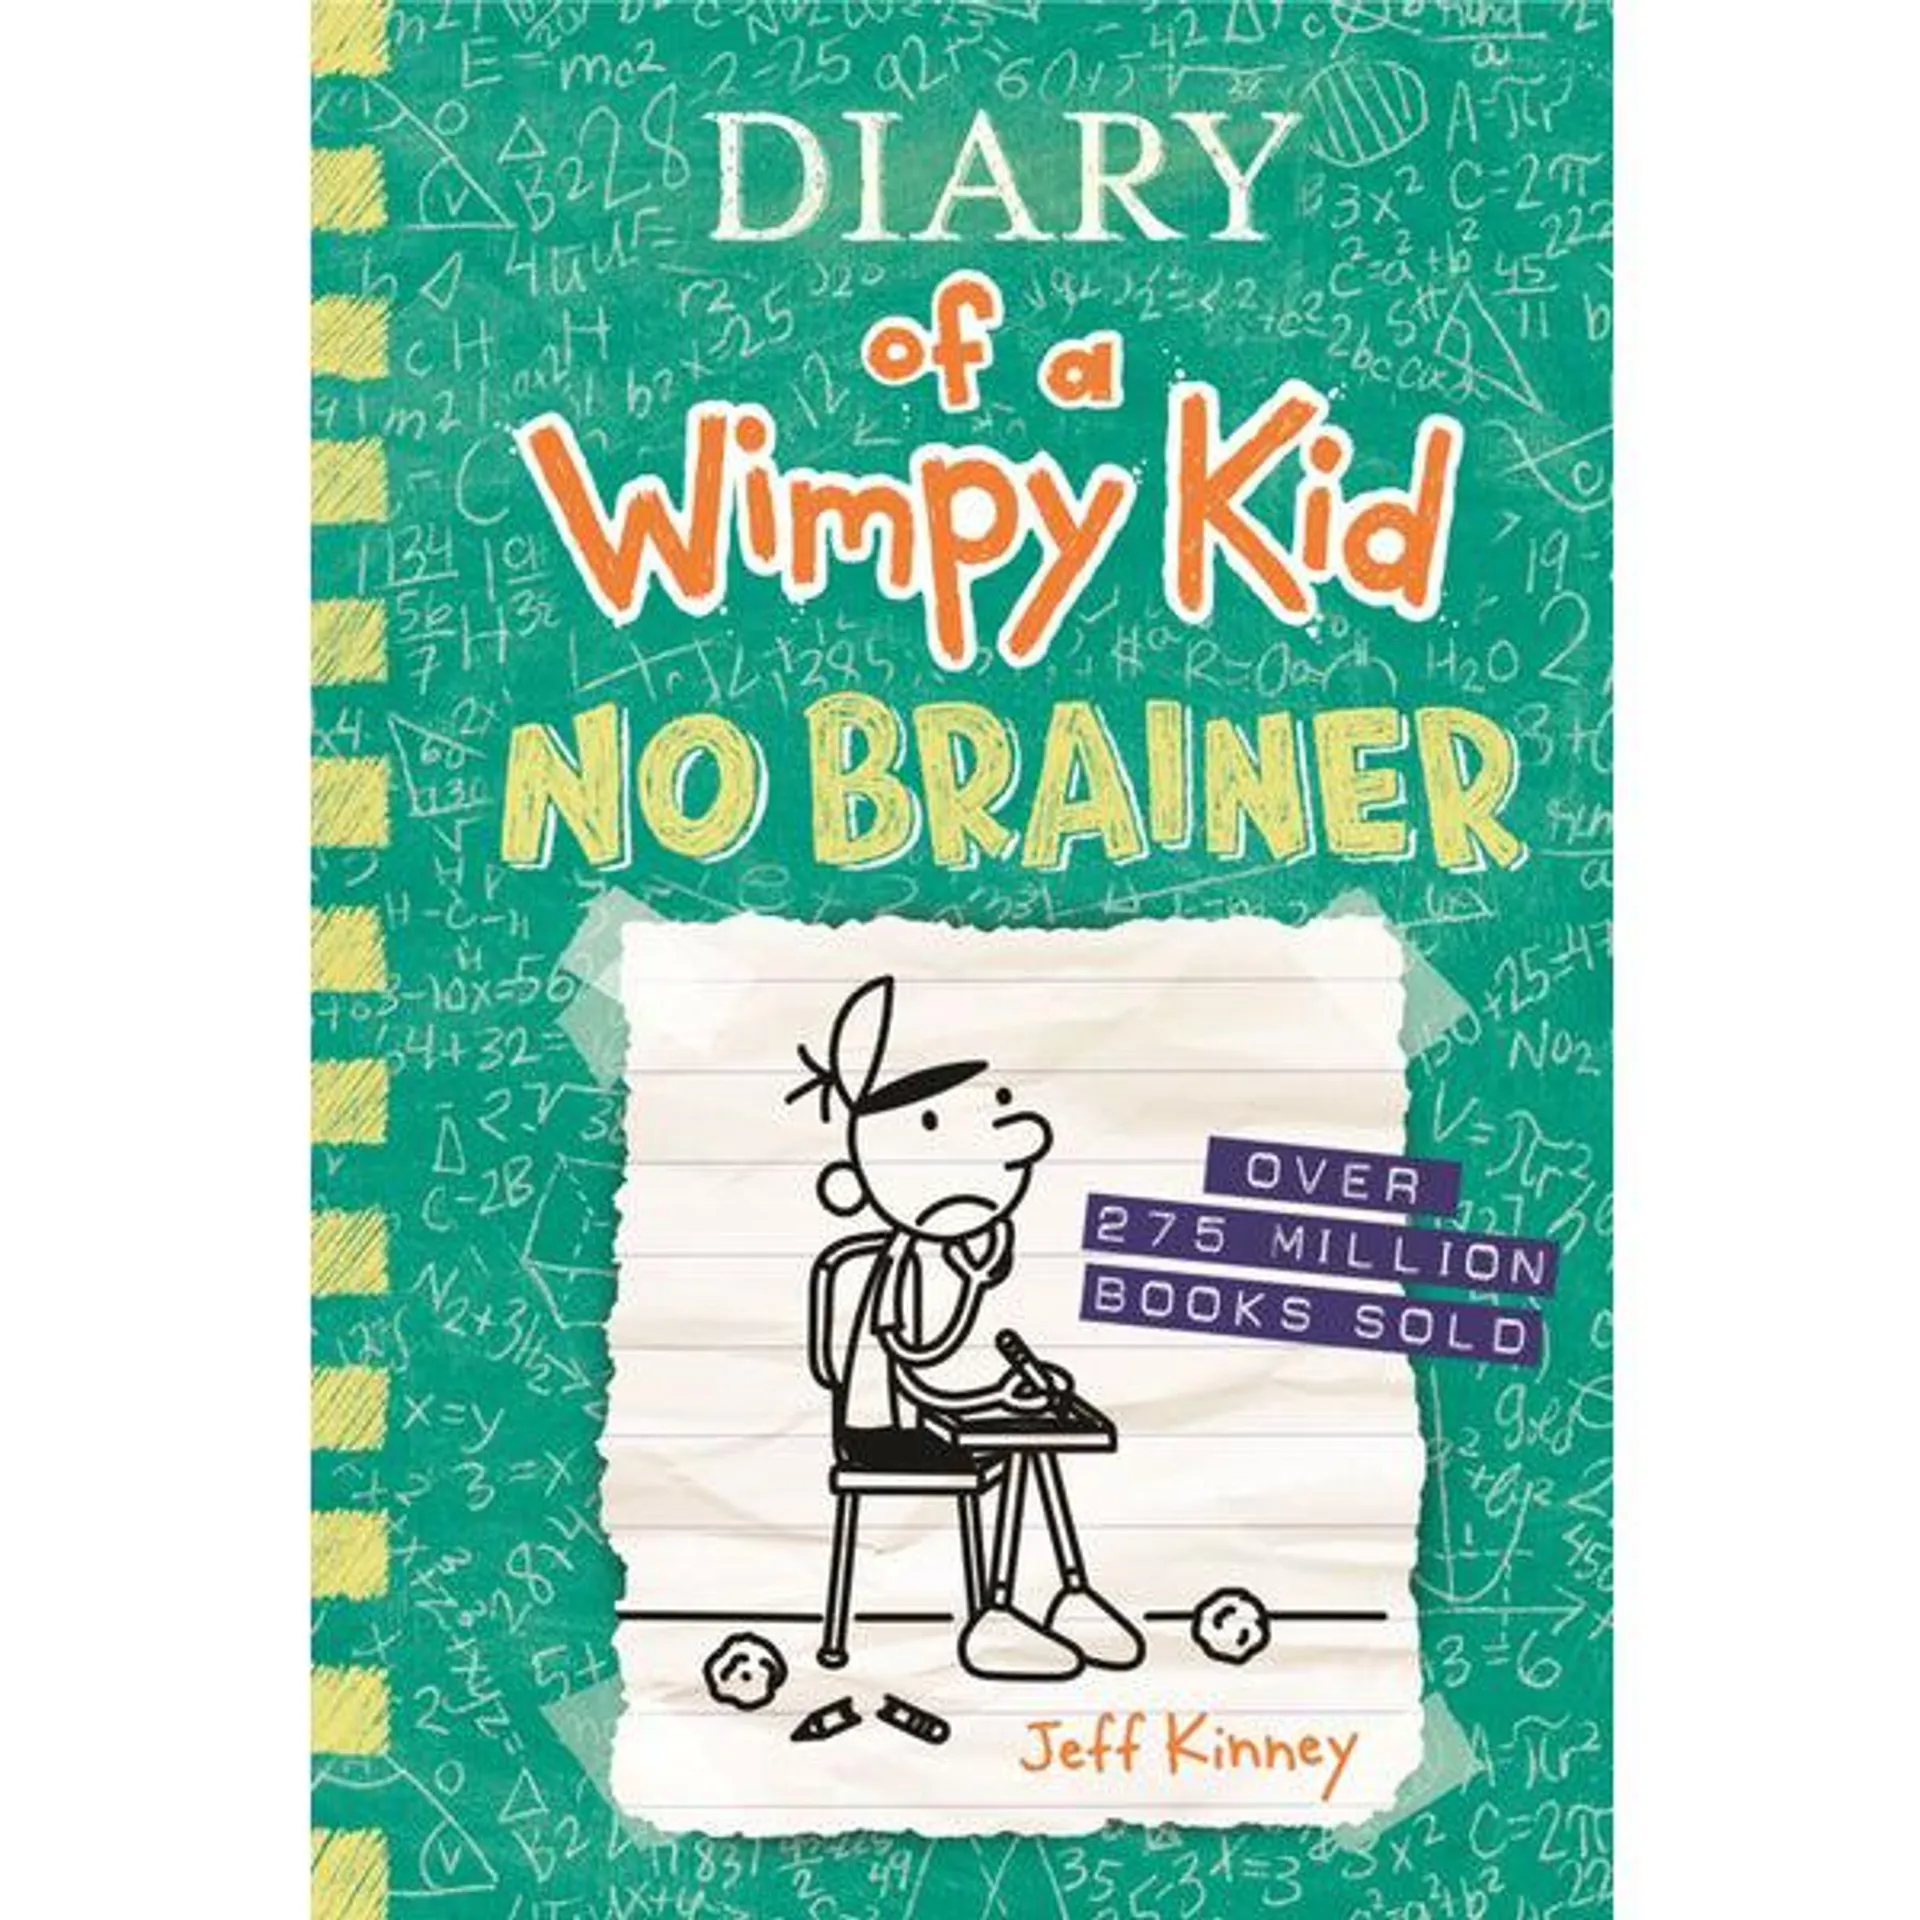 No Brainer: Diary of a Wimpy Kid (18) Paperback